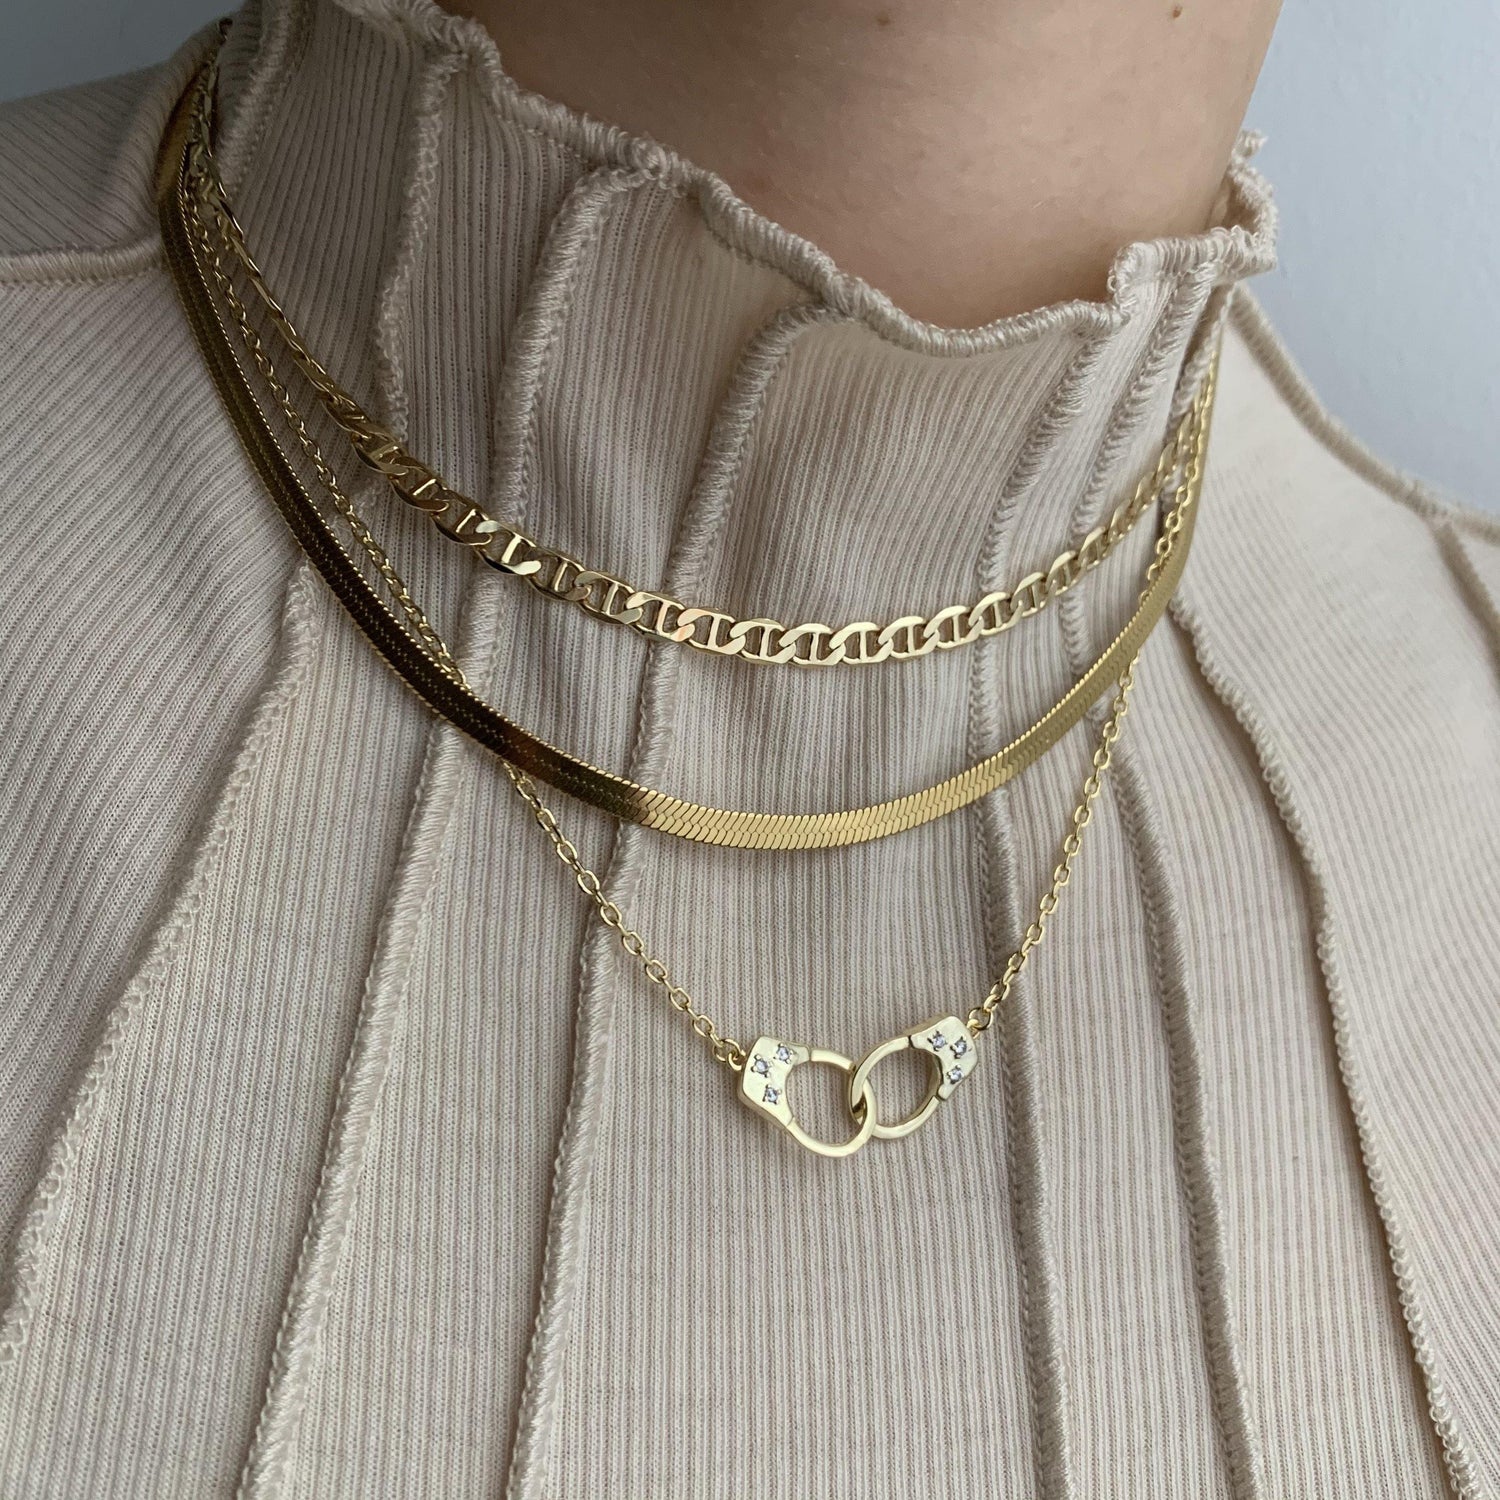 Cuffed Up Necklace